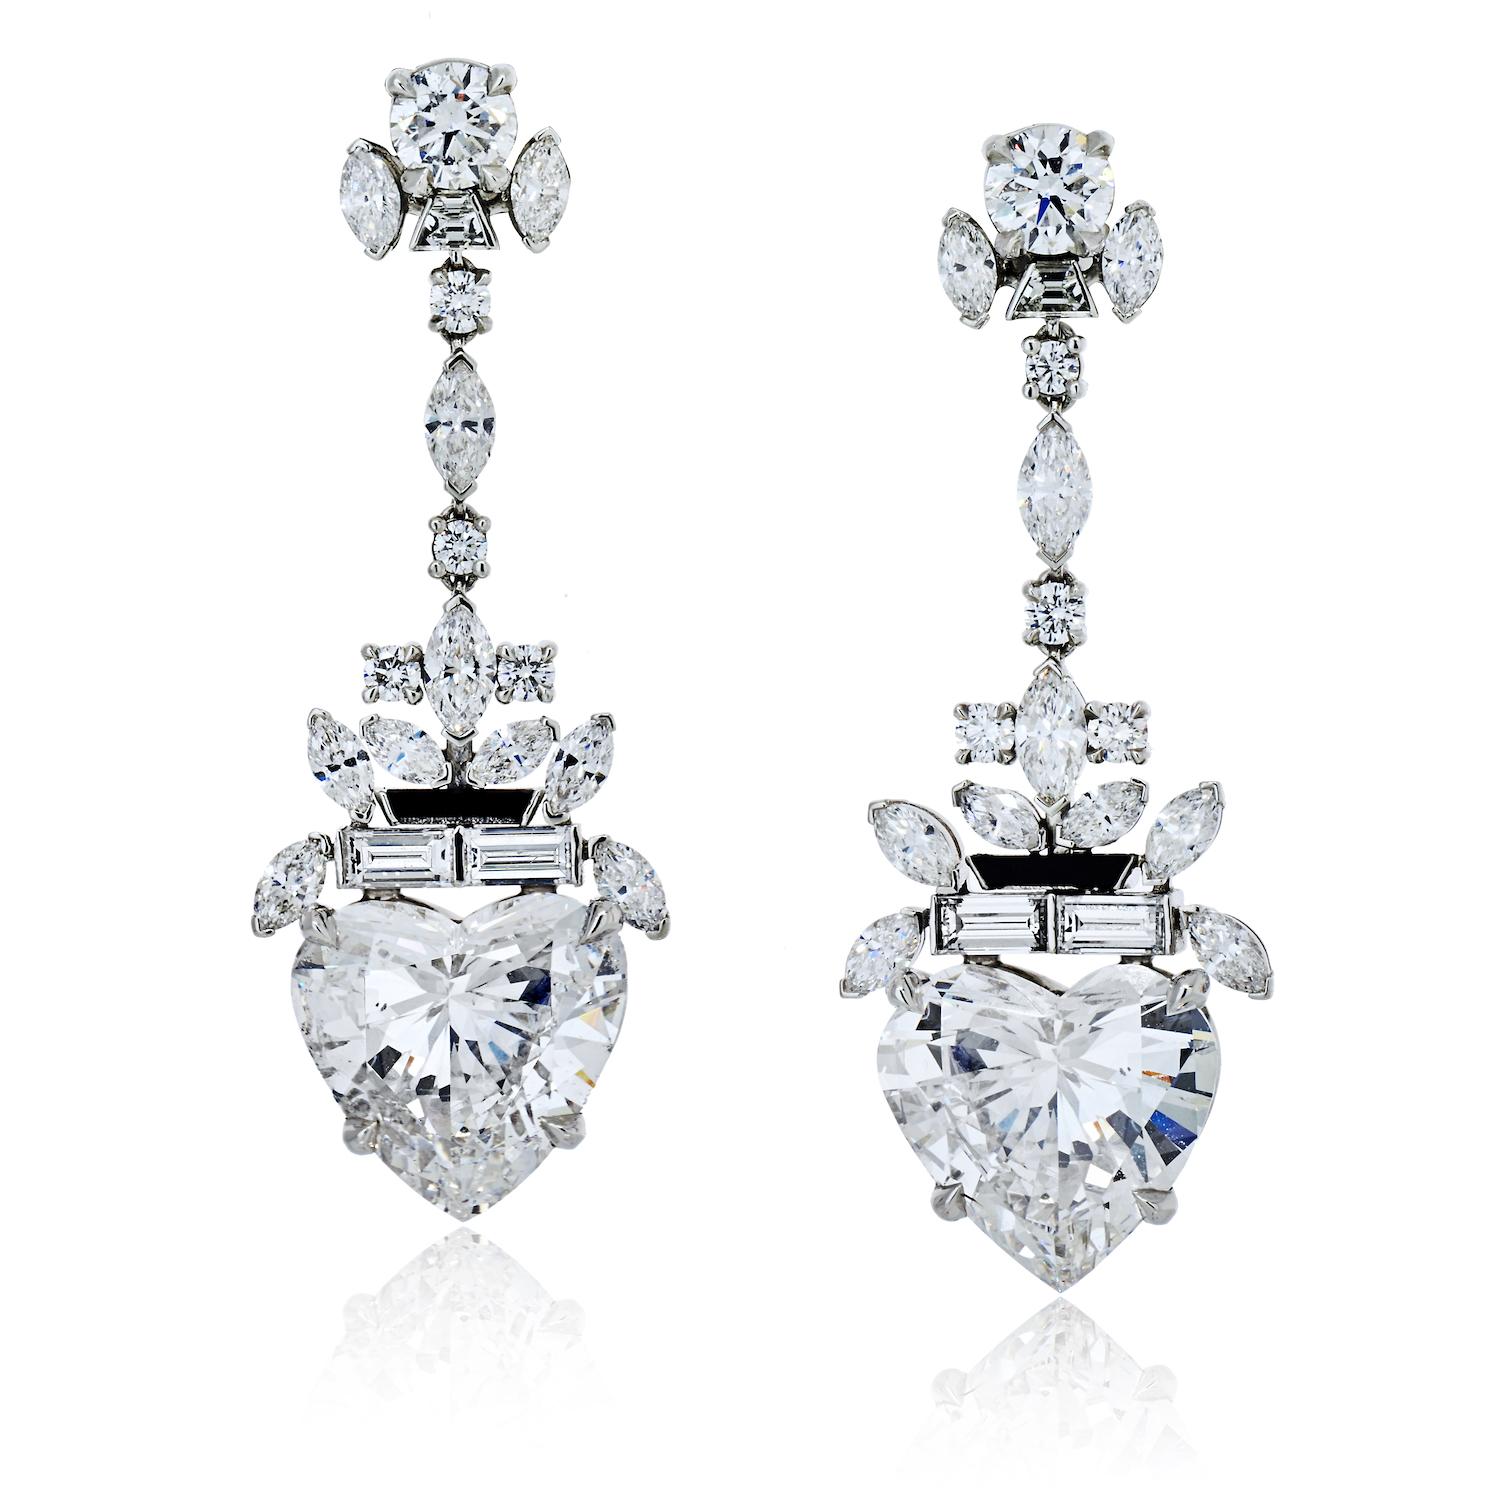 The Raymond Yard diamond drop earrings are an exquisite masterpiece crafted from the finest materials. Made of platinum, the earrings are adorned with a combination of round, baguette, and marquise cut diamonds, each of which adds a unique and